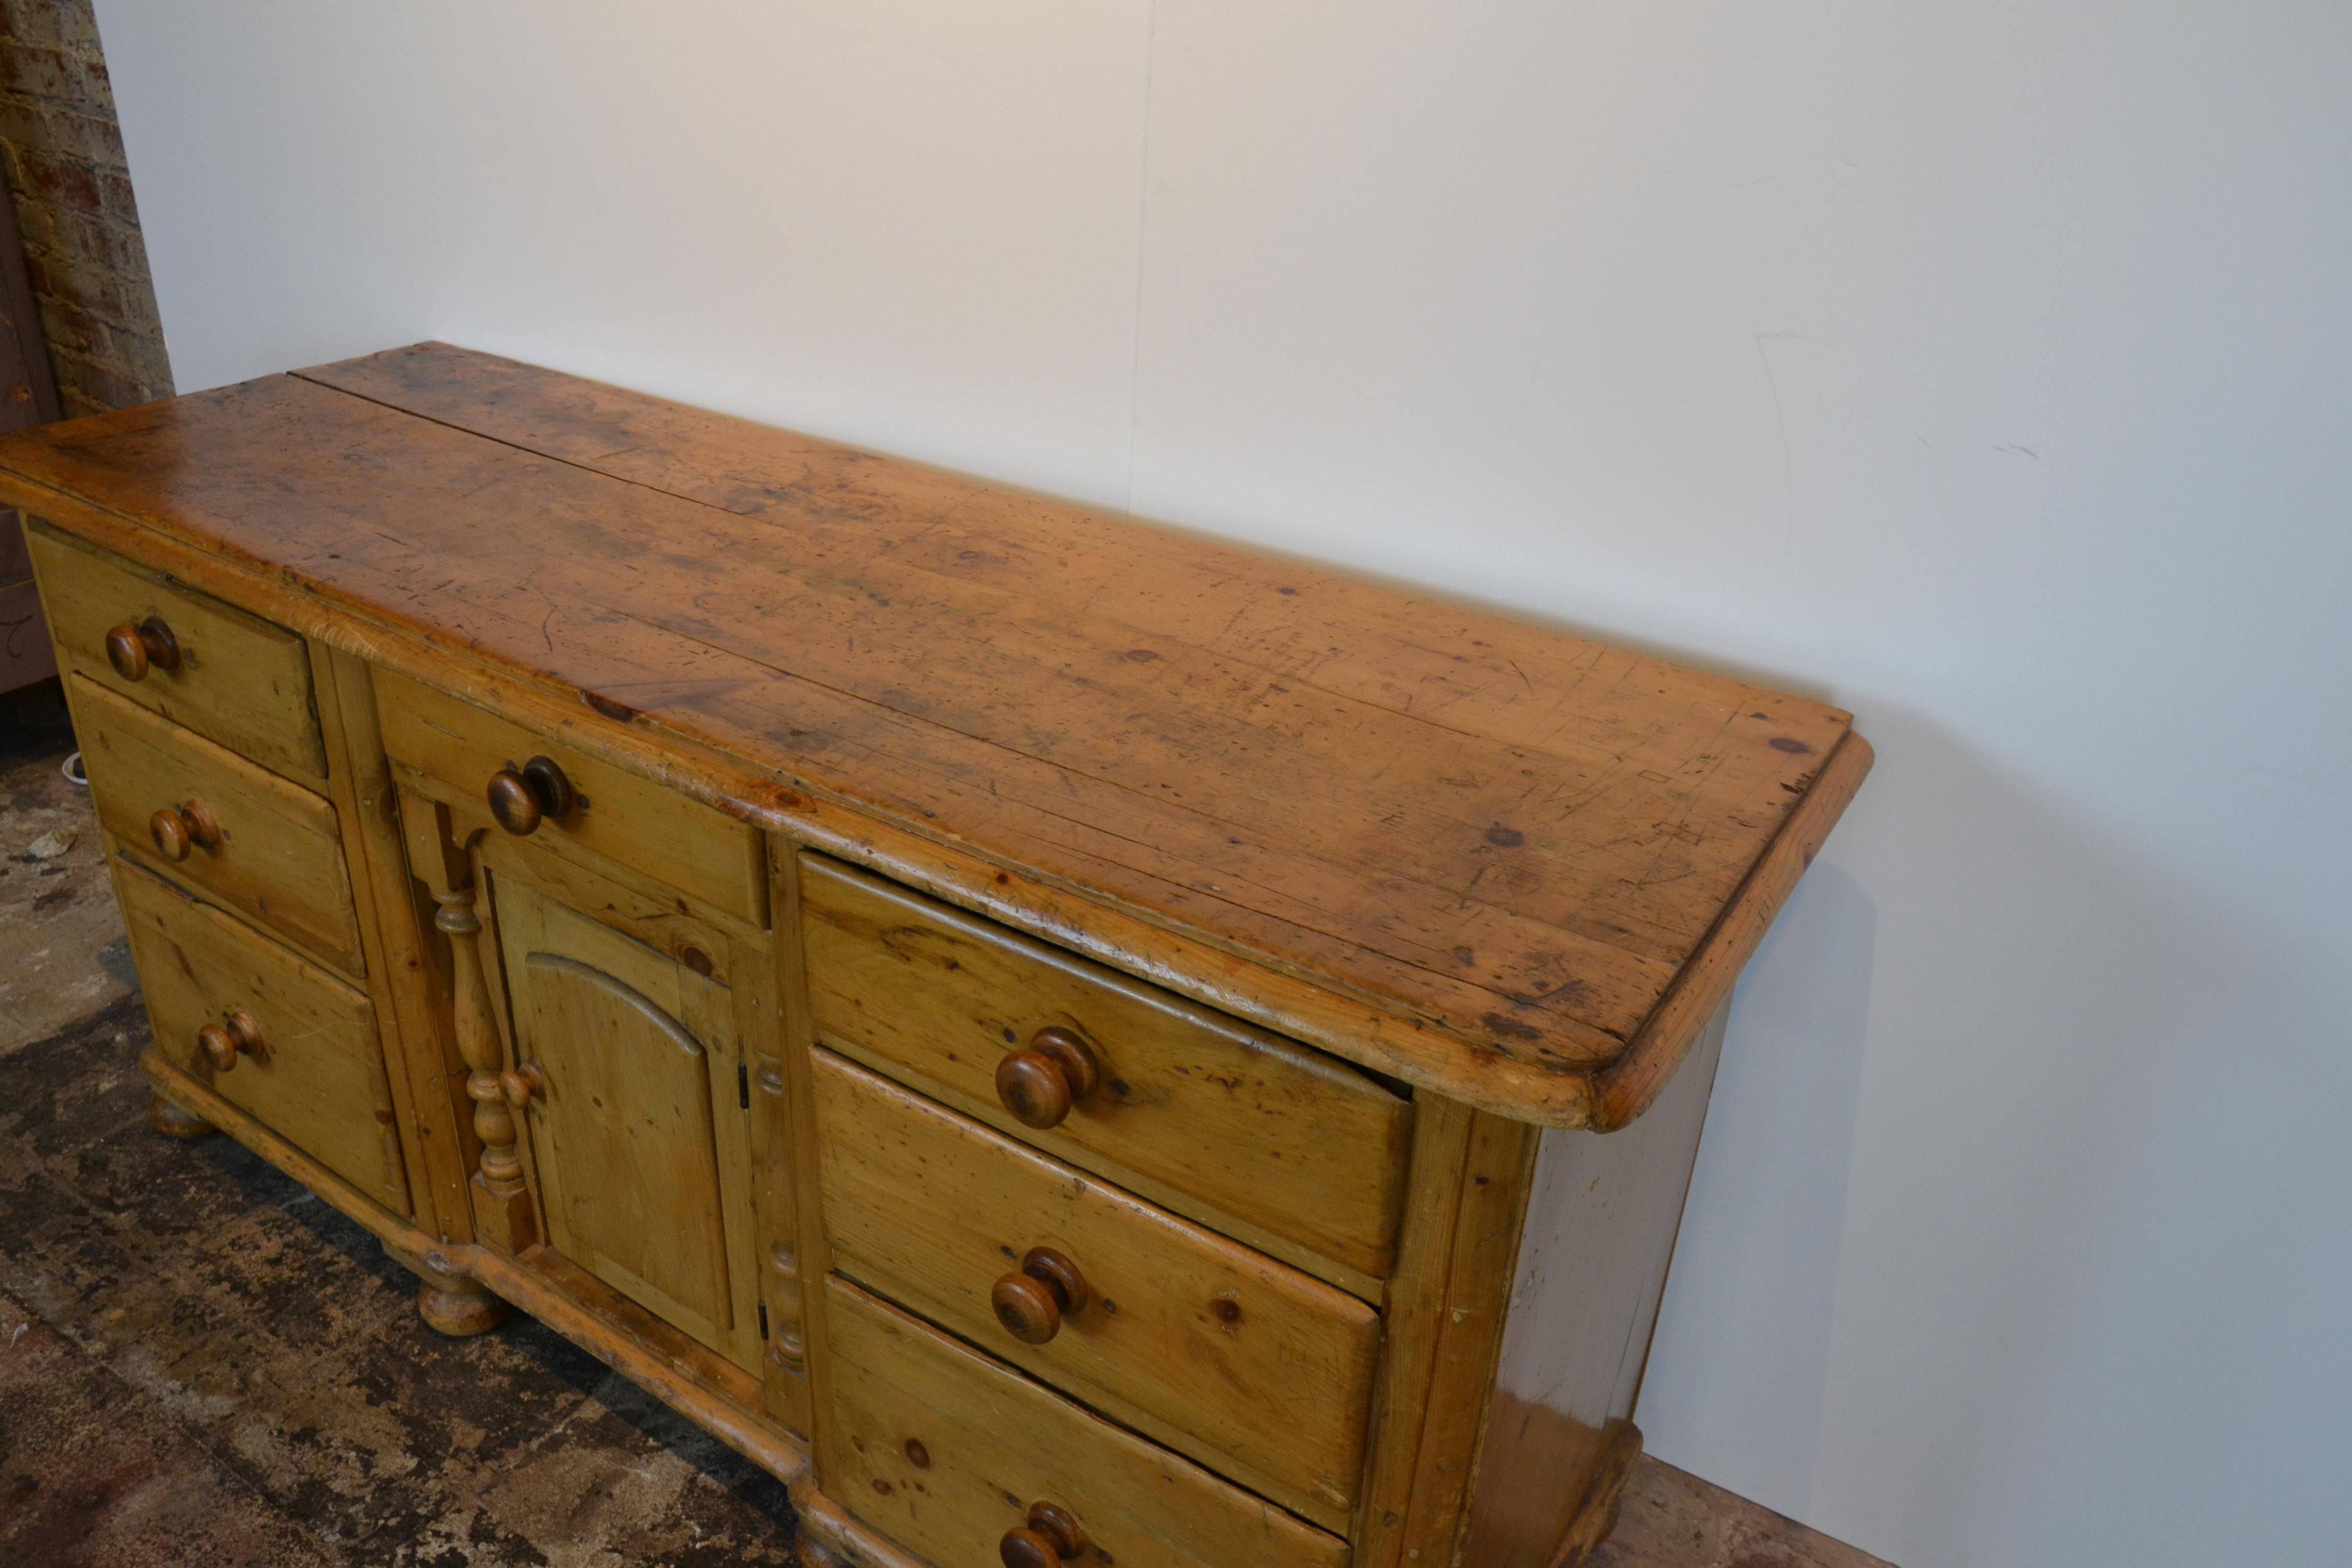 An English 19th century pine dresser base or sideboard. Bun feet. Features 7 drawers with a center cupboard with a solid center panel and surrounded by half-pillars. Great old patina to the top, circa 1850.